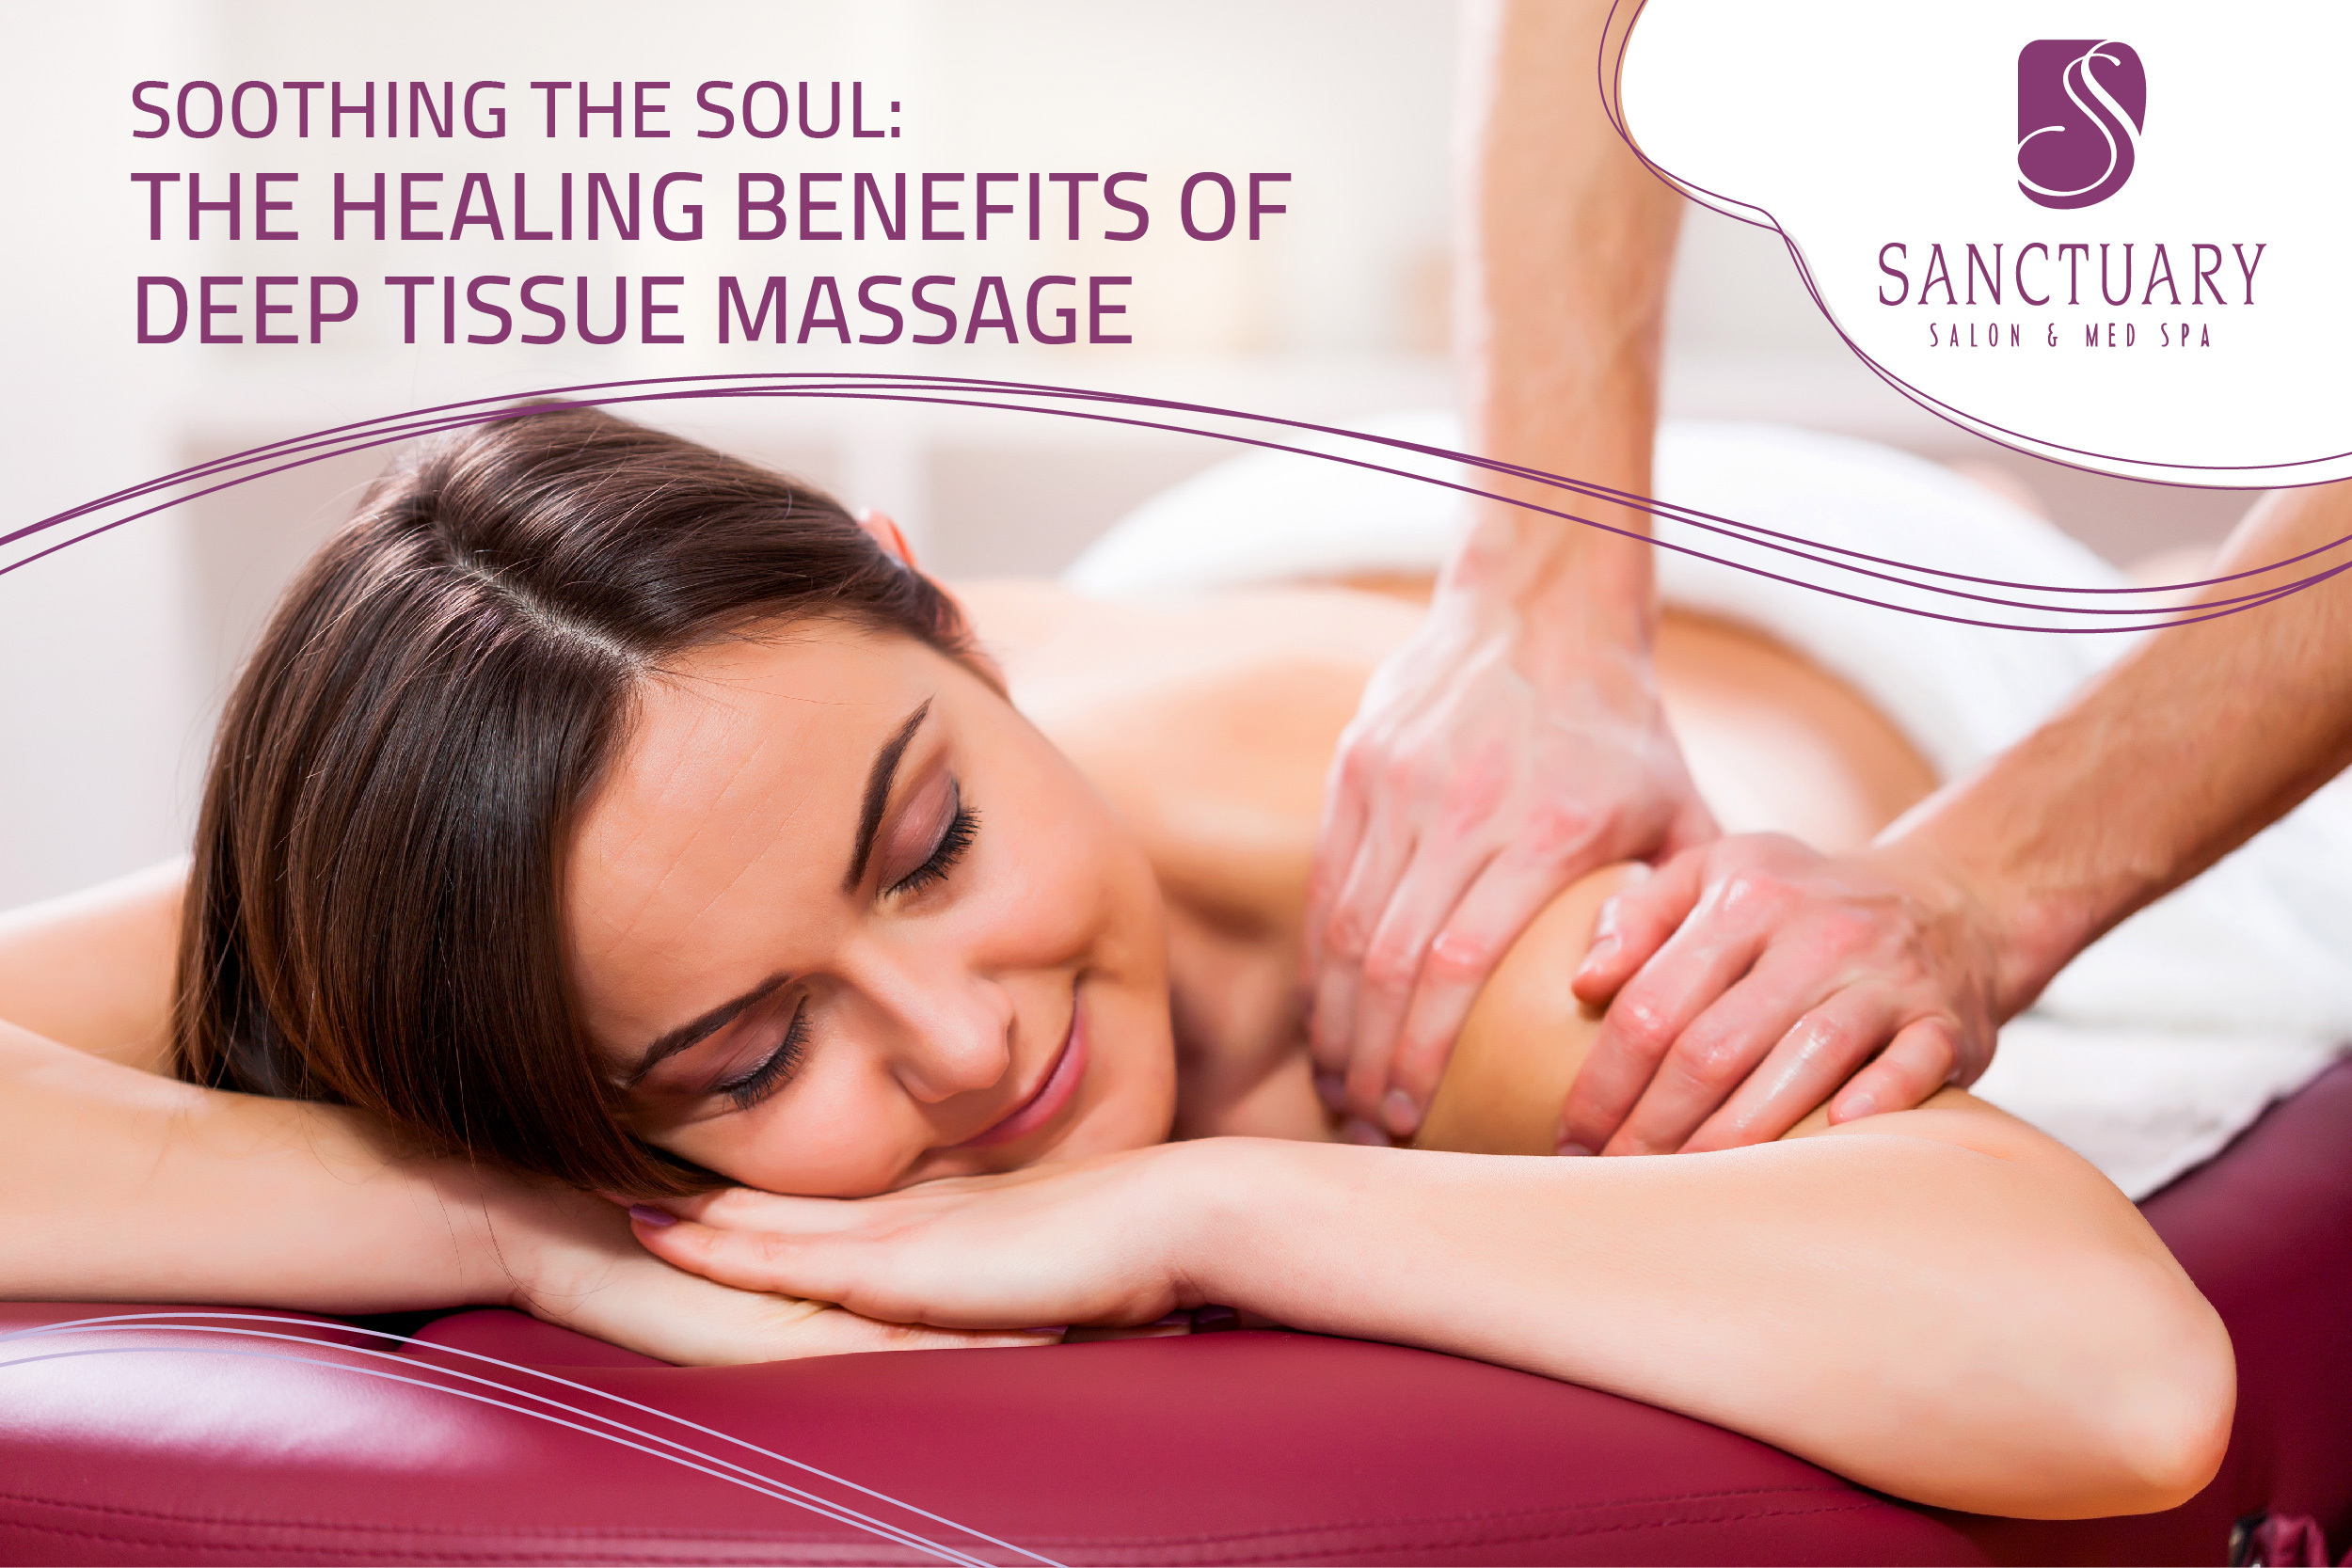 Soothing the Soul: The Healing Benefits of Deep Tissue Massage